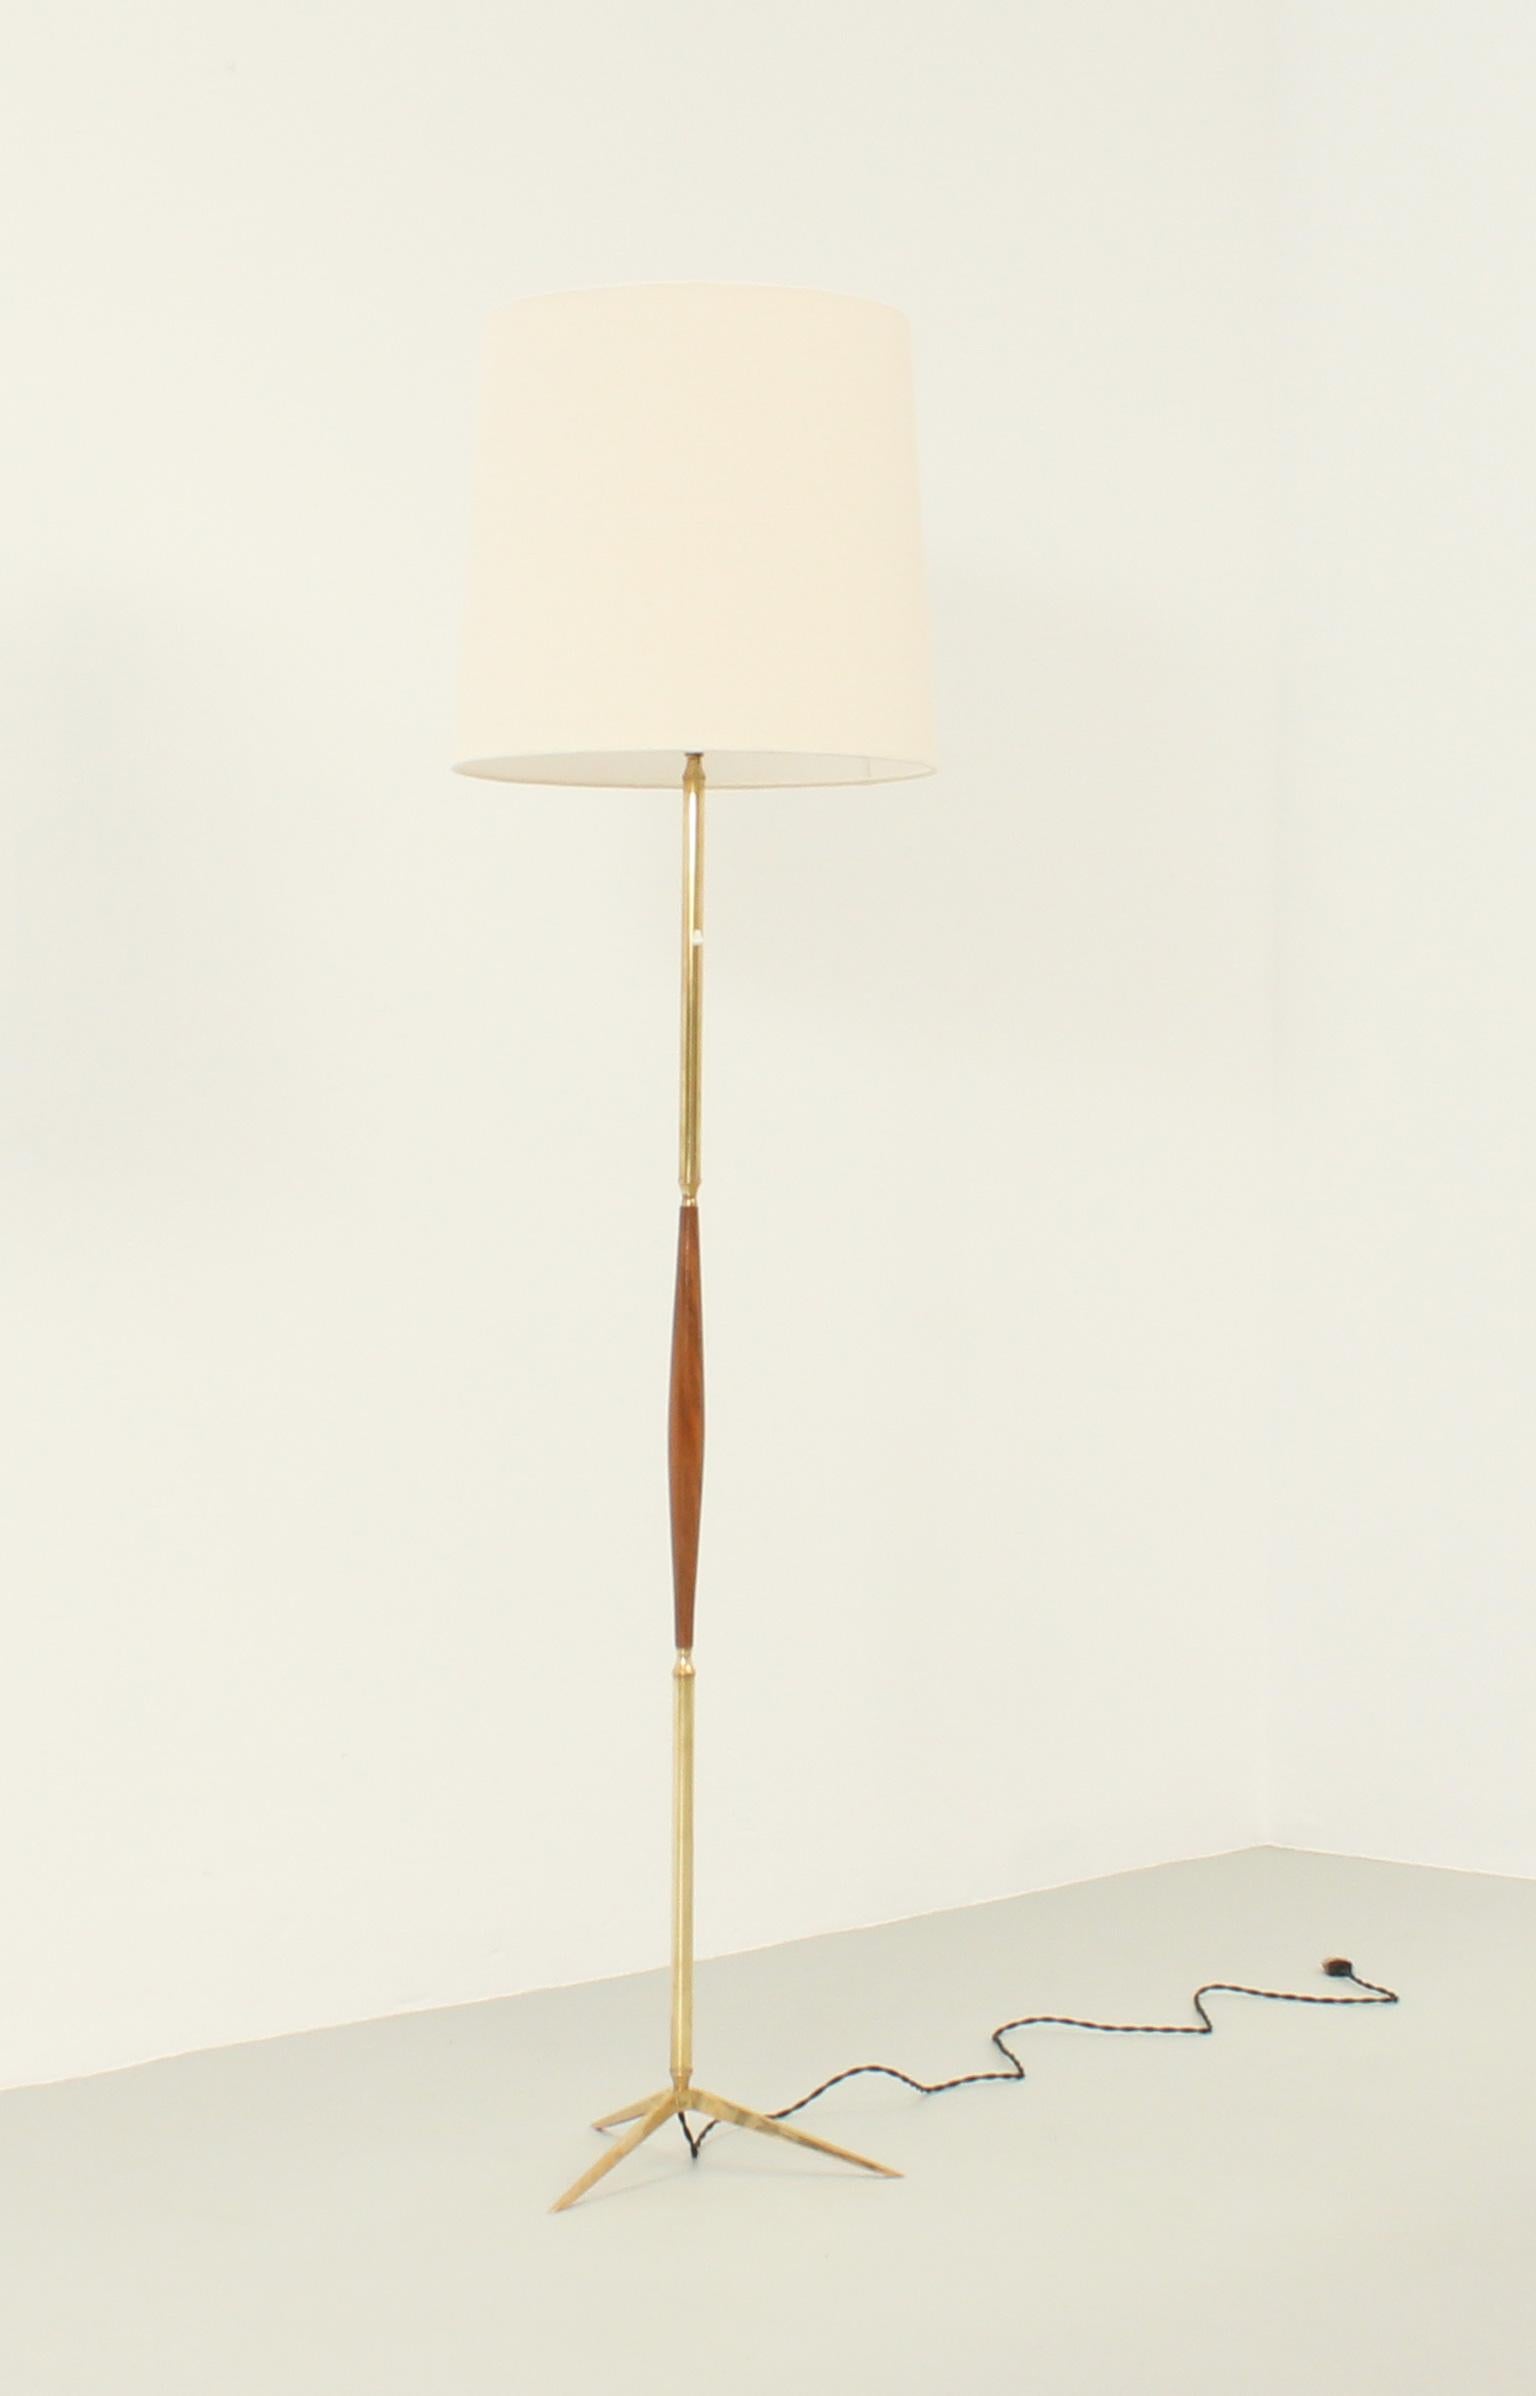 Spanish floor lamp with walnut wood from 1950s. Base and stem in brass with walnut wood and new fabric shade.